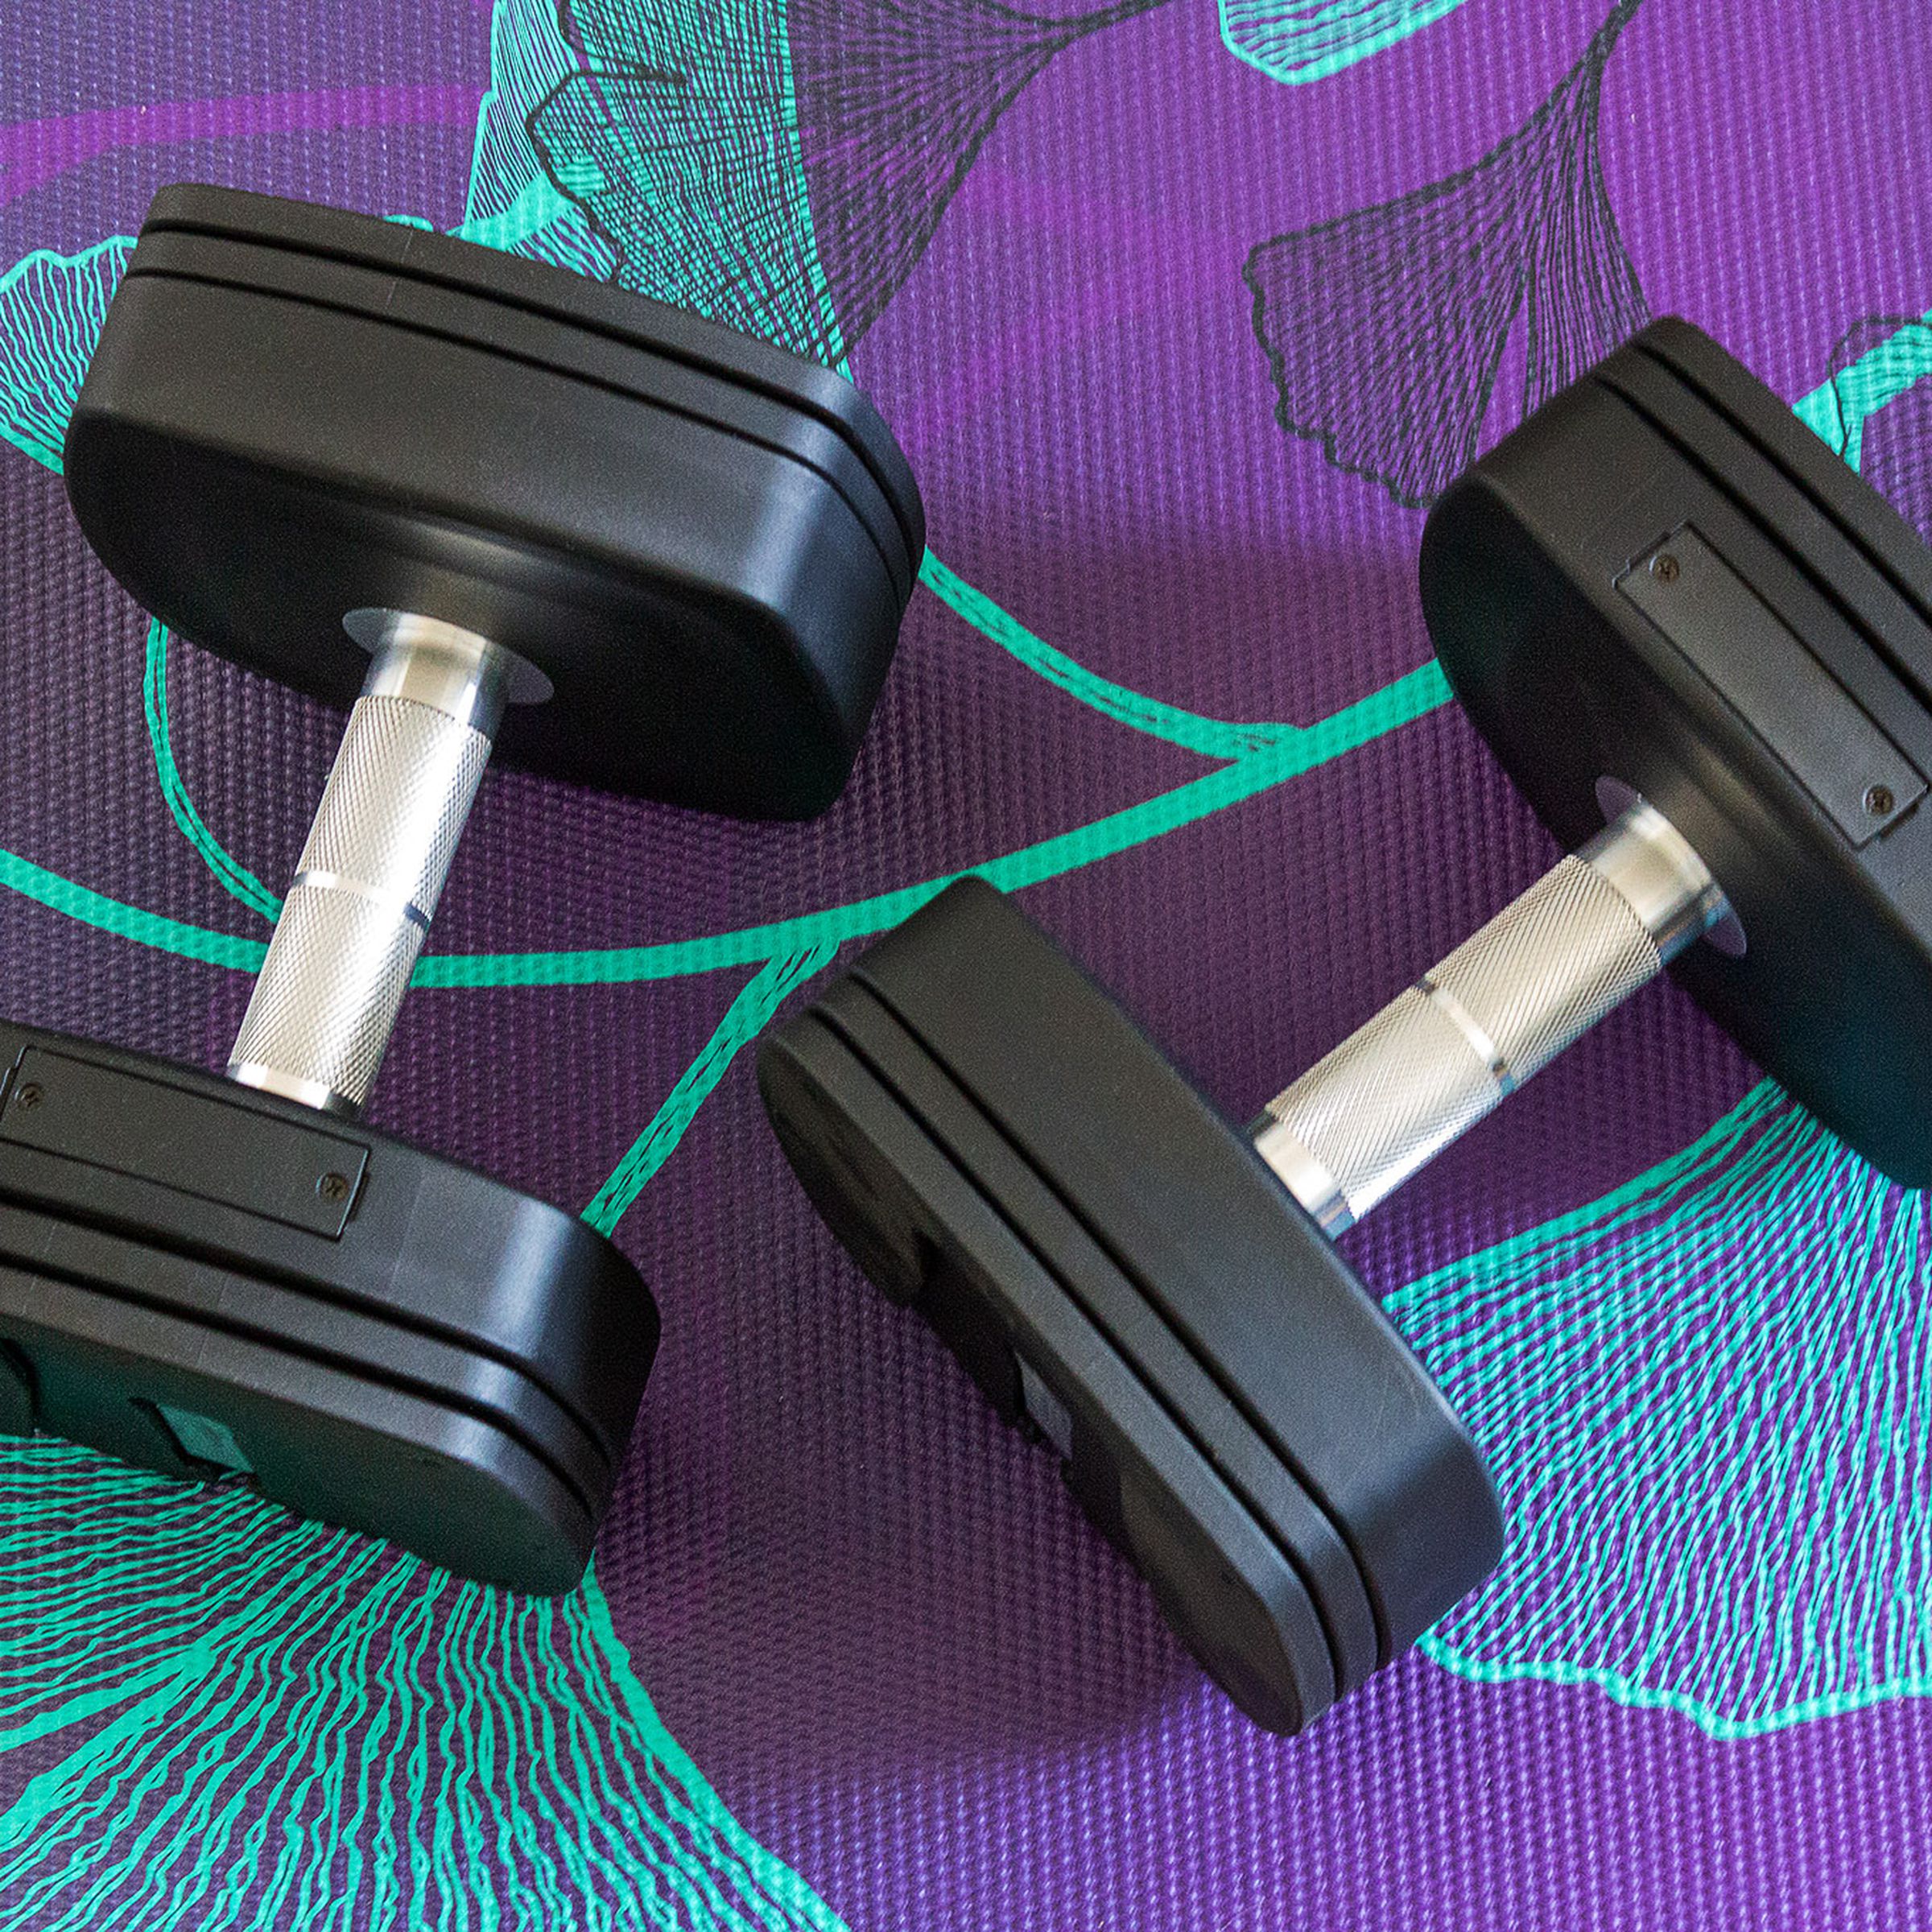 The NordicTrack iSelect Adjustable Dumbbells can be controlled with Alexa.